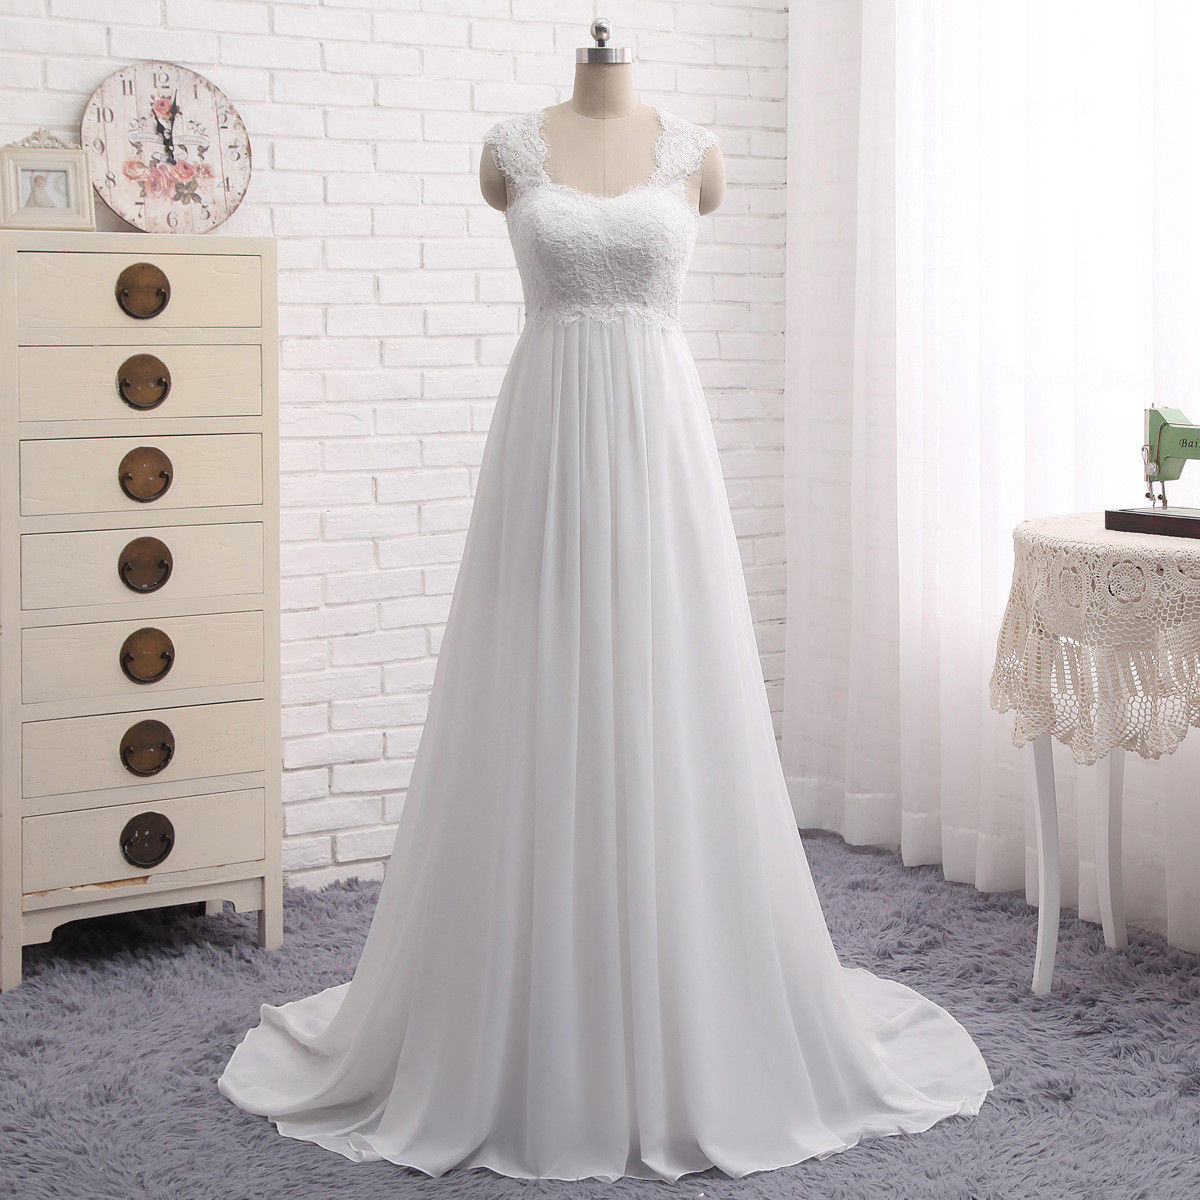 White Chiffon Lace Wedding Dresses 2018 Plus Size Ruffle China Wedding Gowns Plus Size Simple Bride Gowns